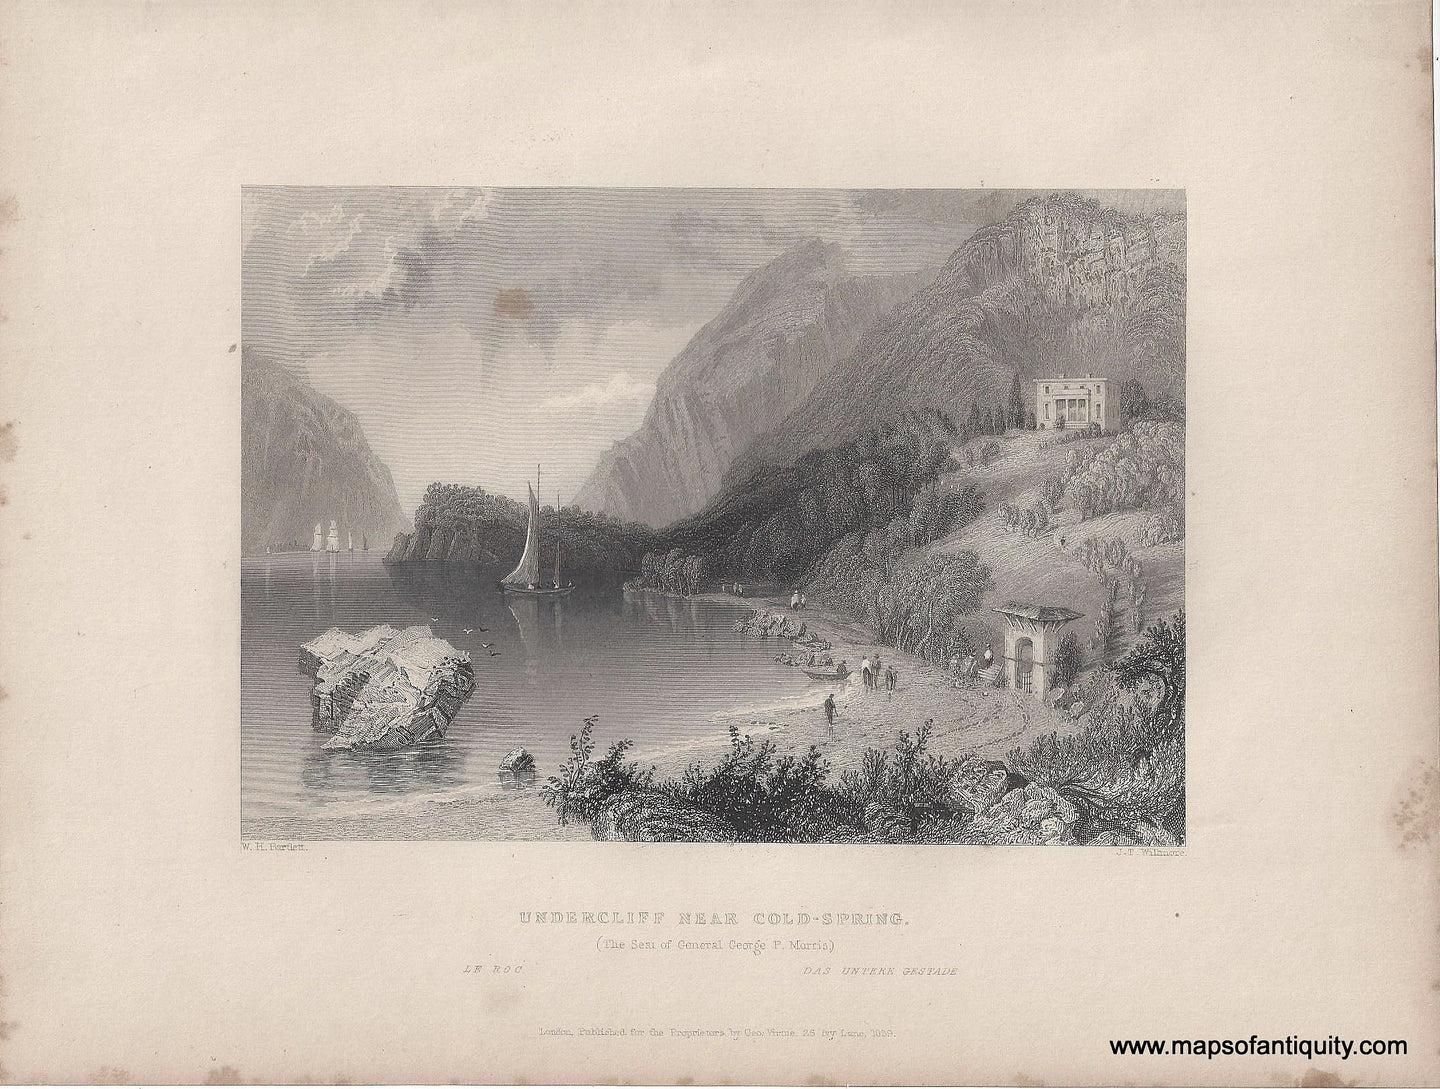 Genuine-Antique-Print-Undercliff-Near-Cold-Spring-The-Seat-of-General-George-P-Morris--1839-Bartlett-Maps-Of-Antiquity